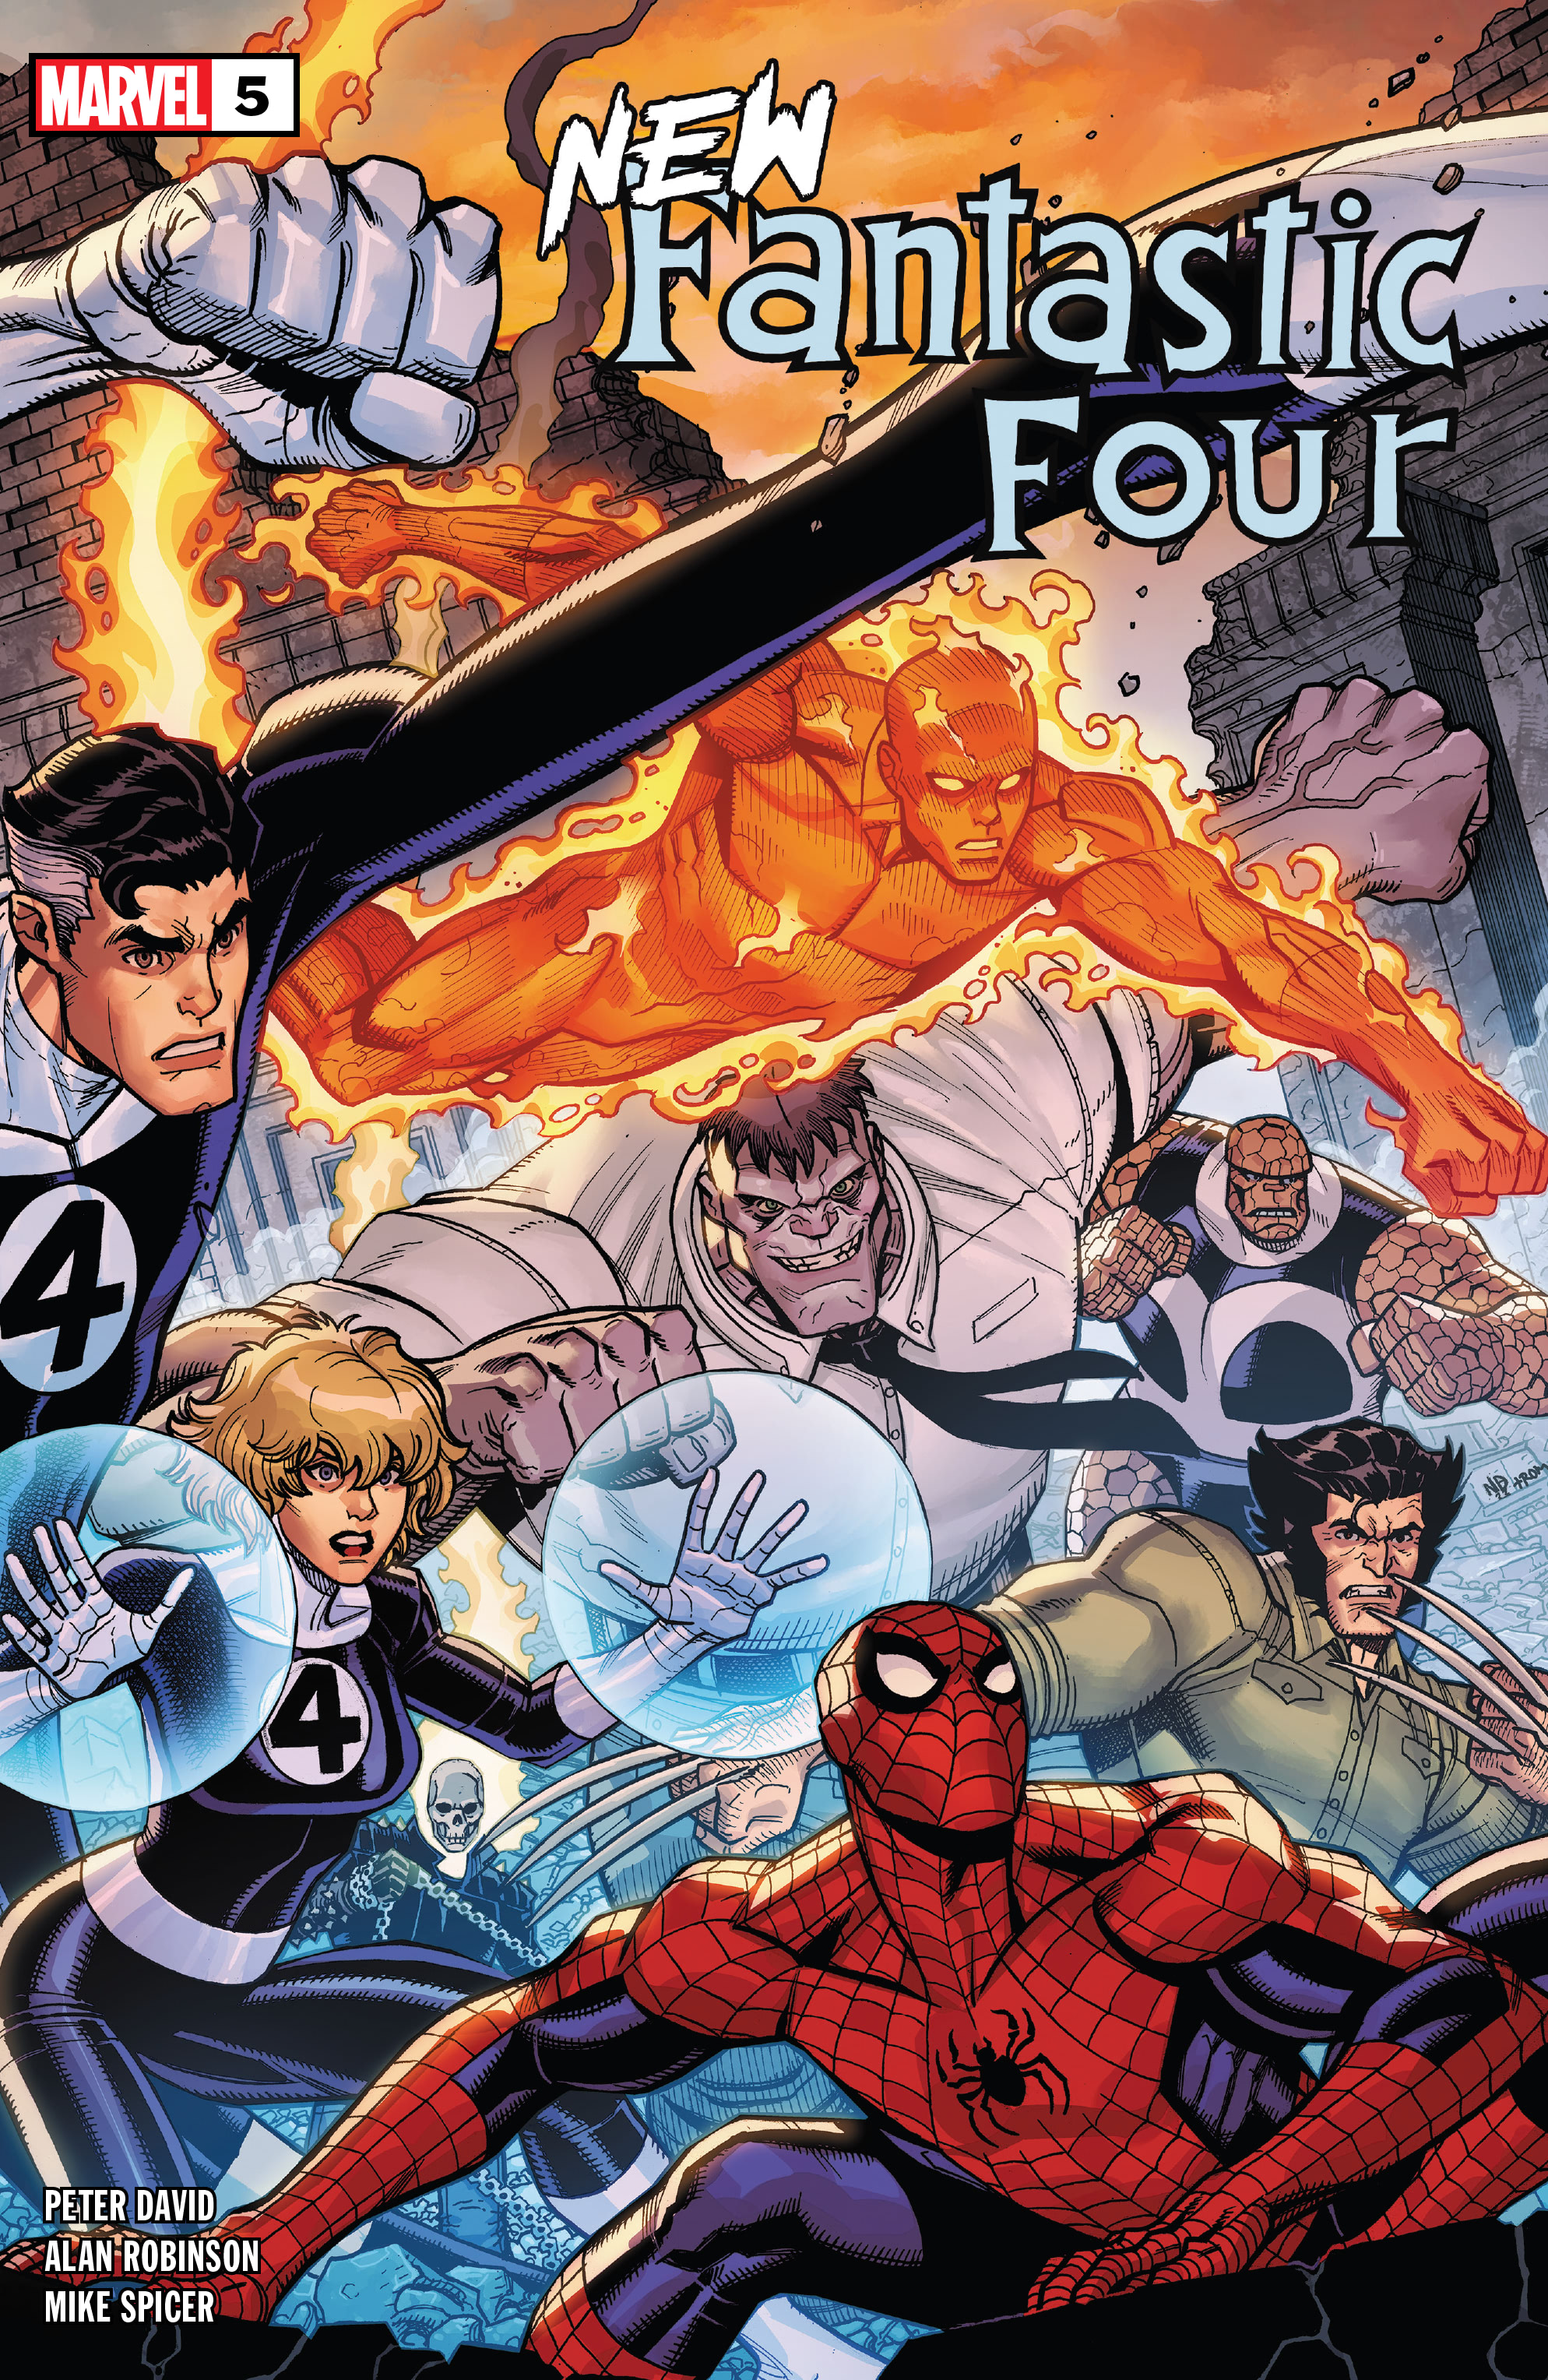 Read online New Fantastic Four comic -  Issue #5 - 1